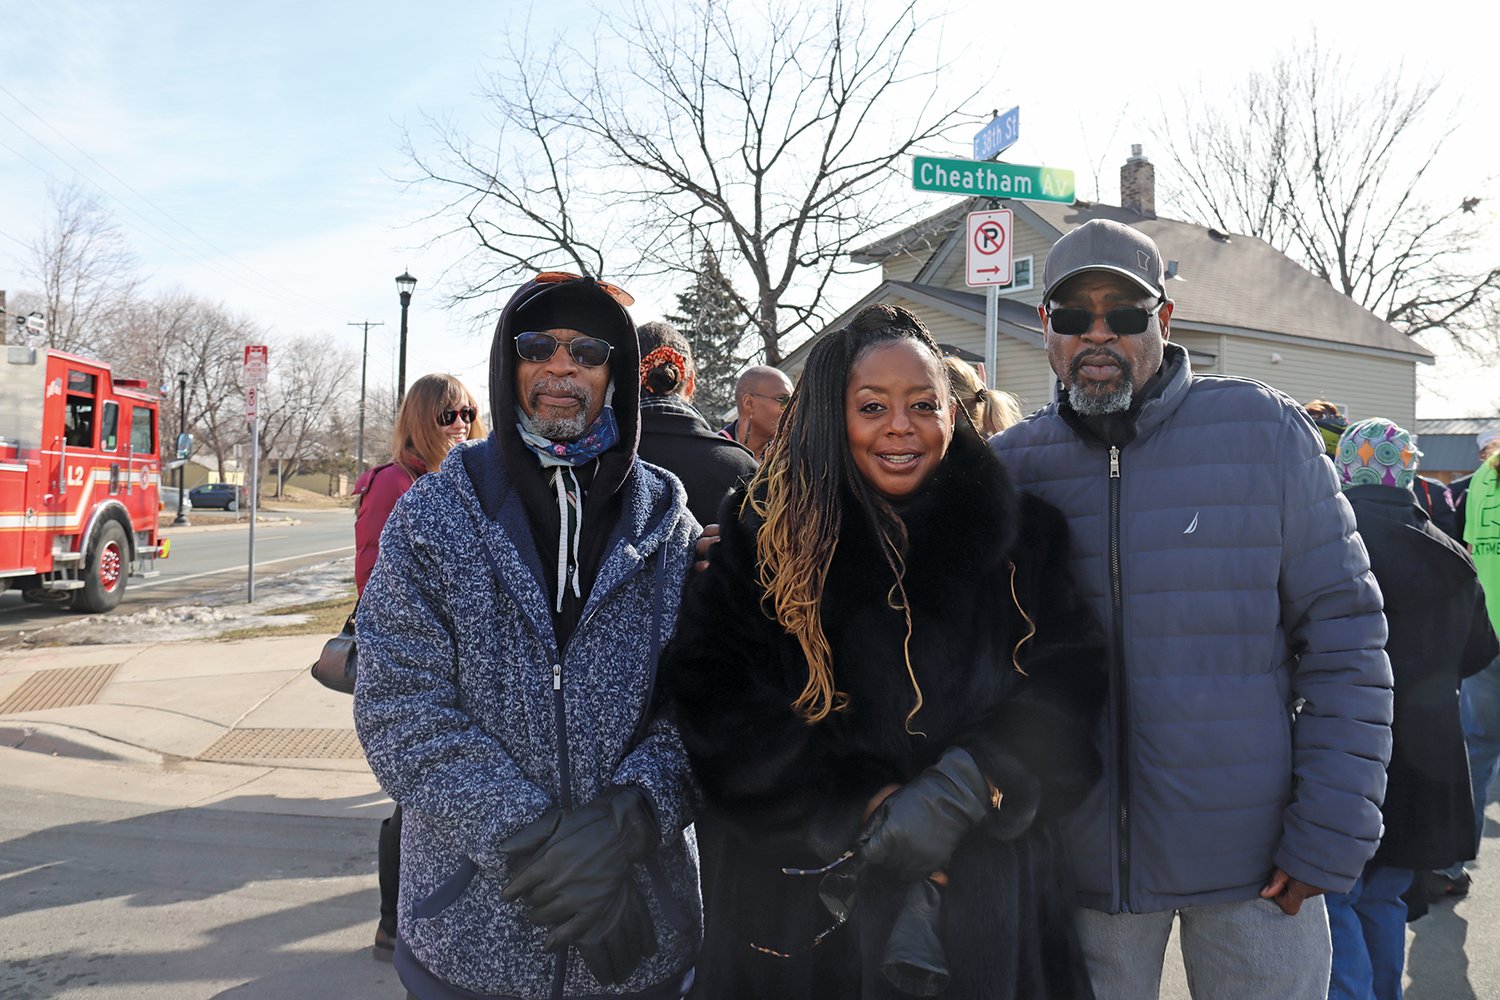 St. James AME Church historian Larry Burt, at left, stated, “It’s a relief to go from villain to hero.” With him are Reverend Dr. Tracey Gibson (center) and Stephen Dye. (Photo by Tesha M. Christensen)